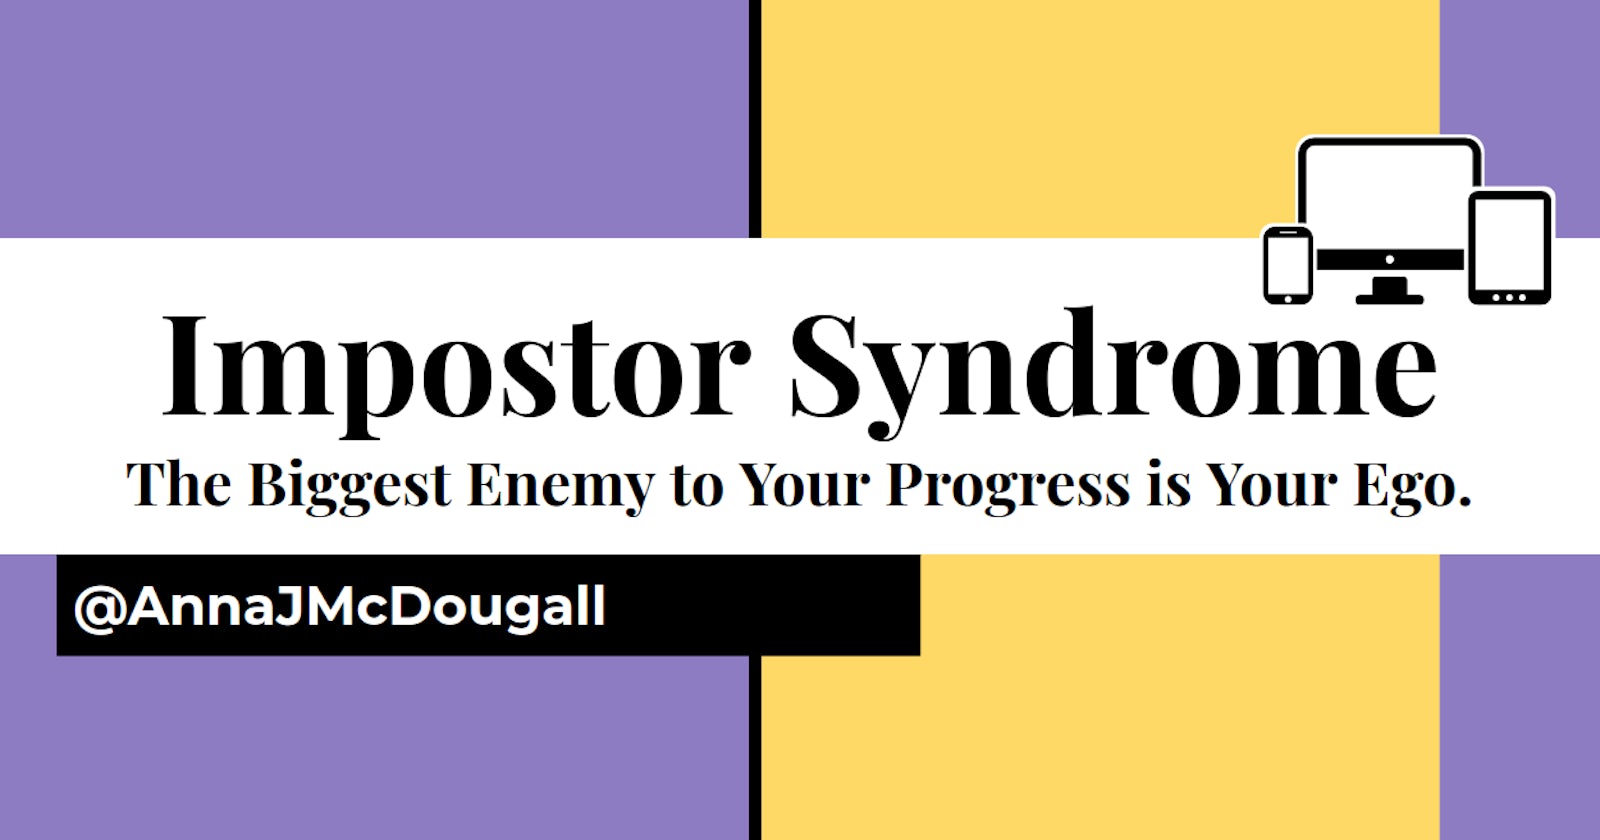 Impostor Syndrome: The Biggest Enemy to Your Progress is Your Ego